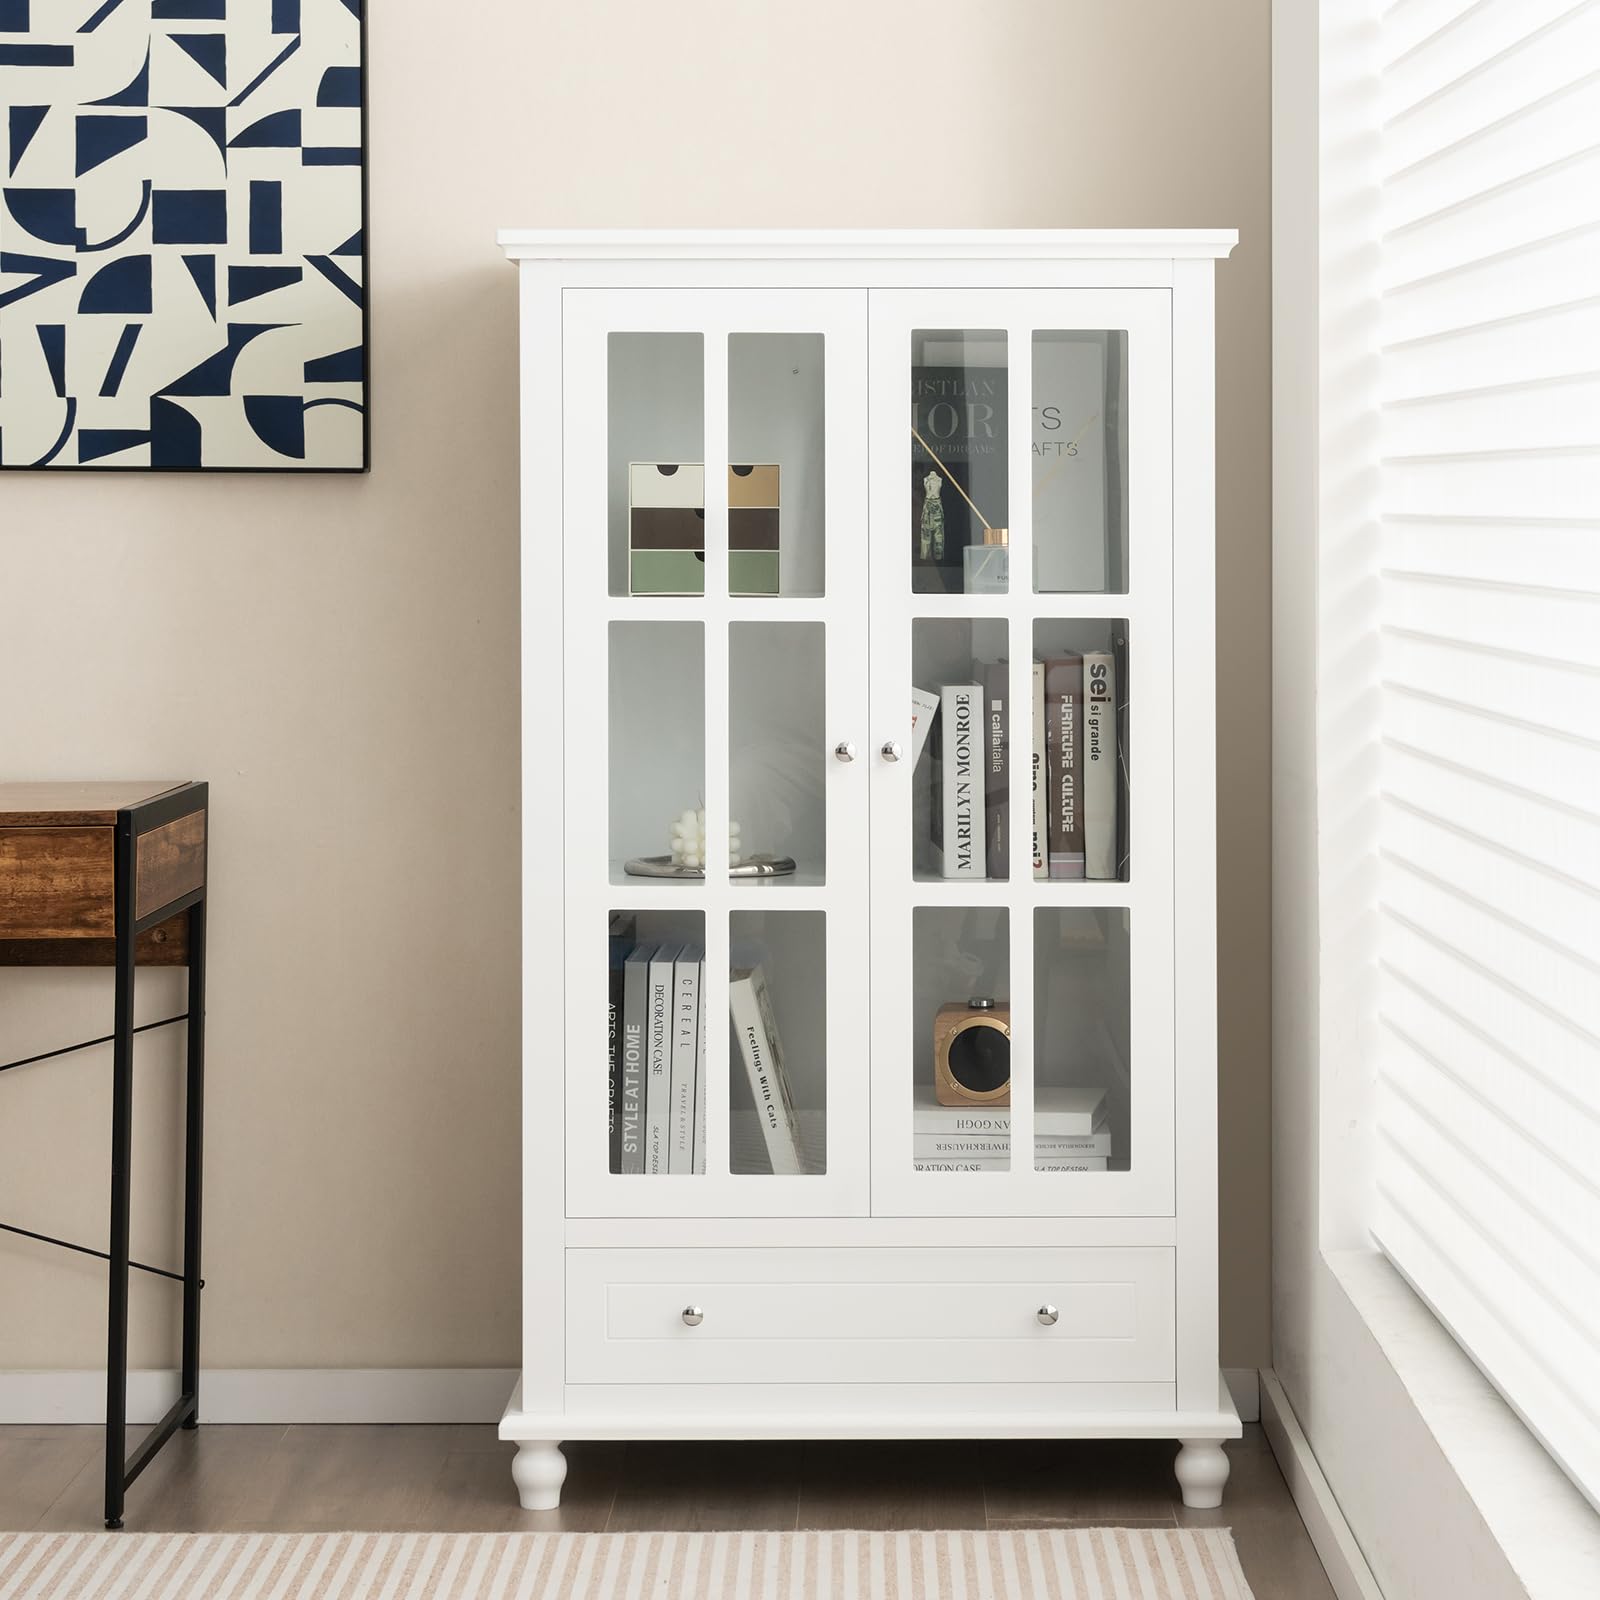 Giantex Storage Cabinet with Doors and Adjustable Shelves